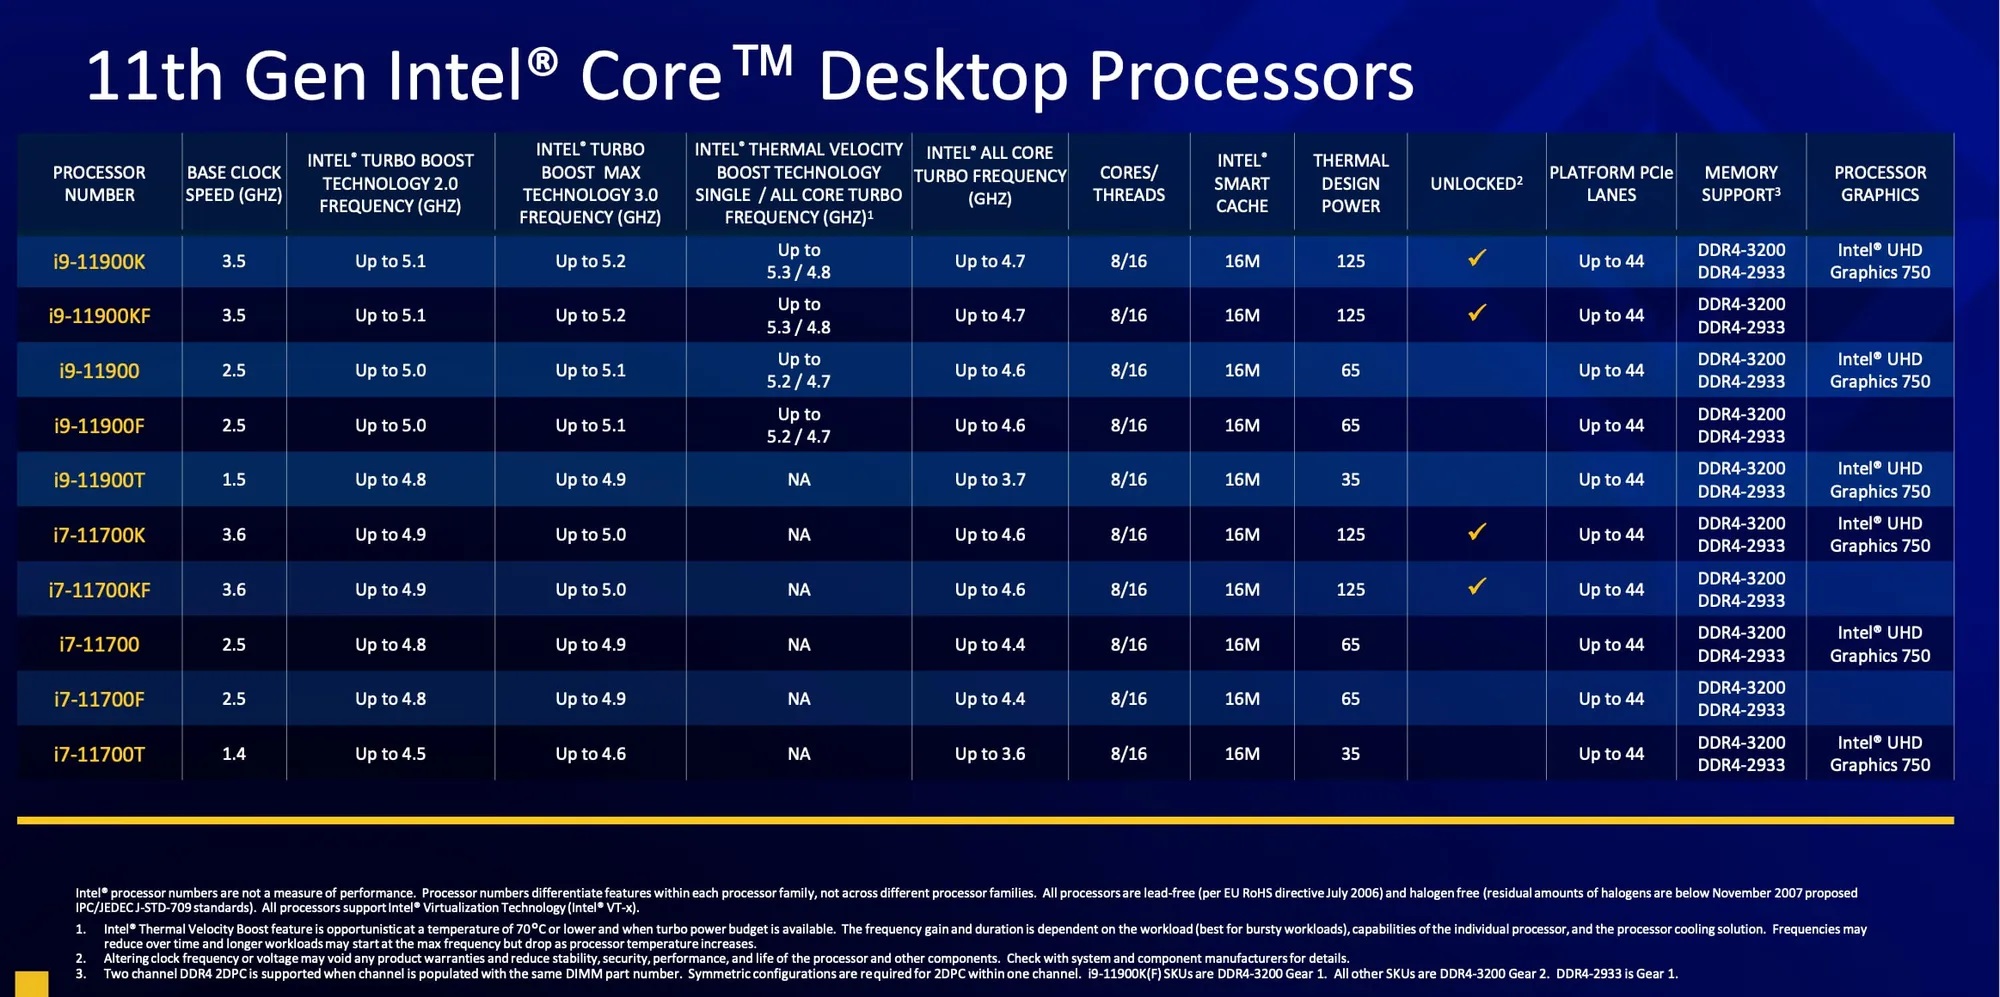 Intel's new processors are now officially out